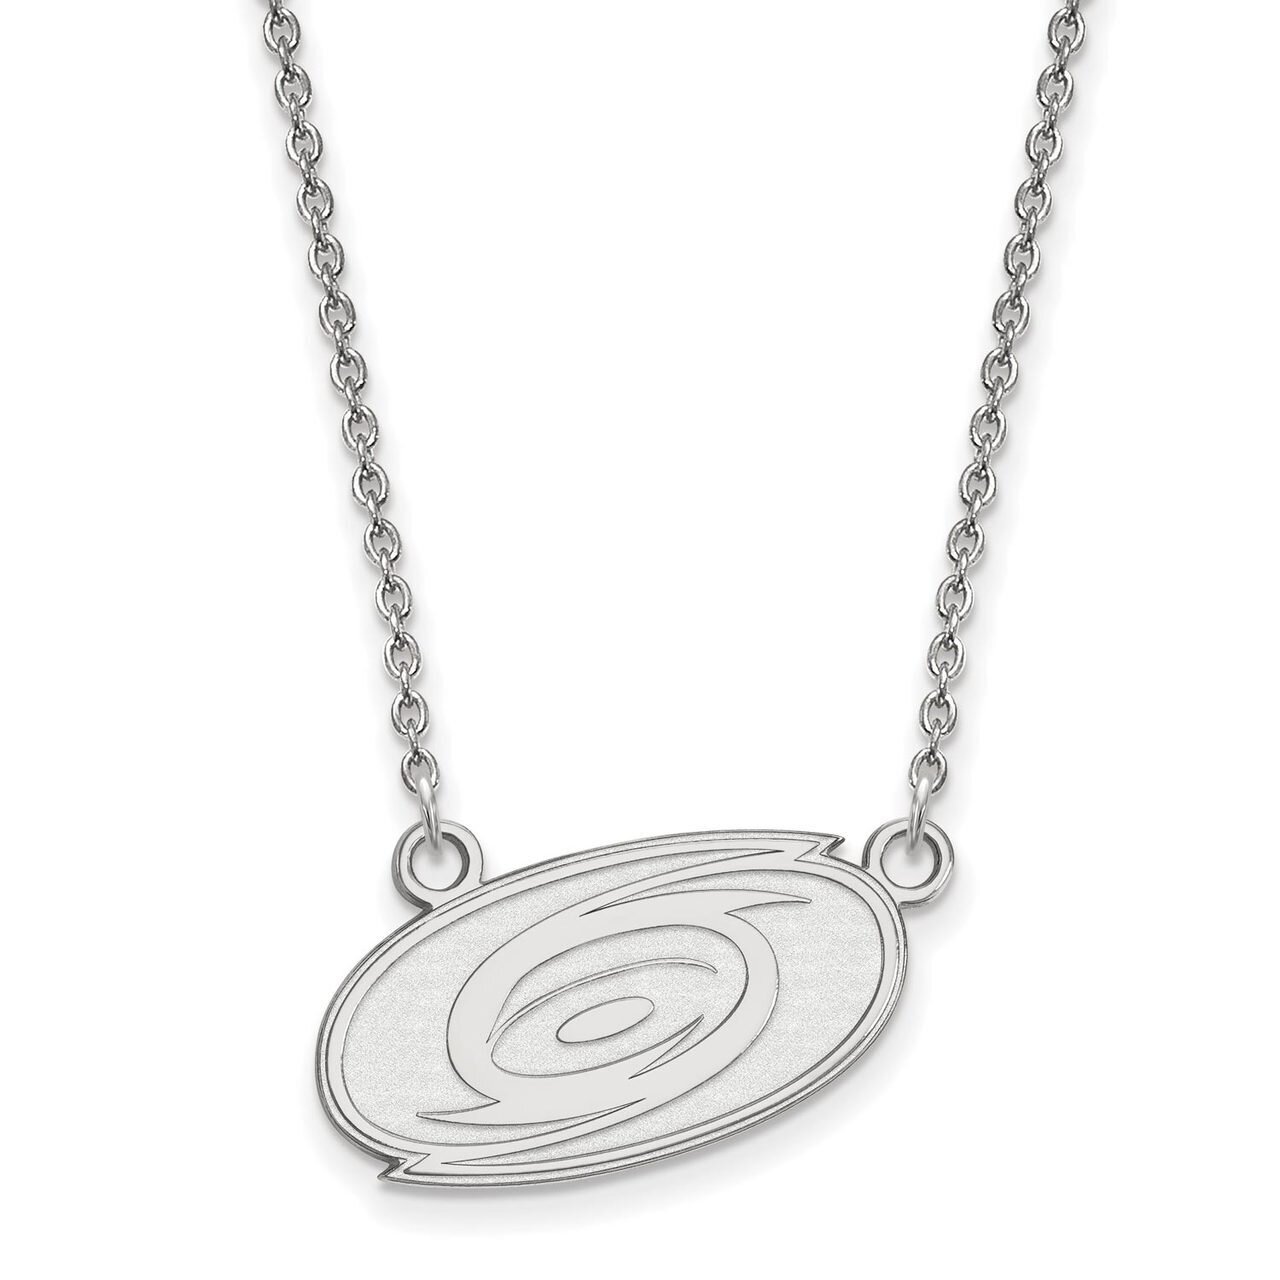 Carolina Hurricanes Small Pendant with Chain Necklace 14k White Gold 4W007HUR-18